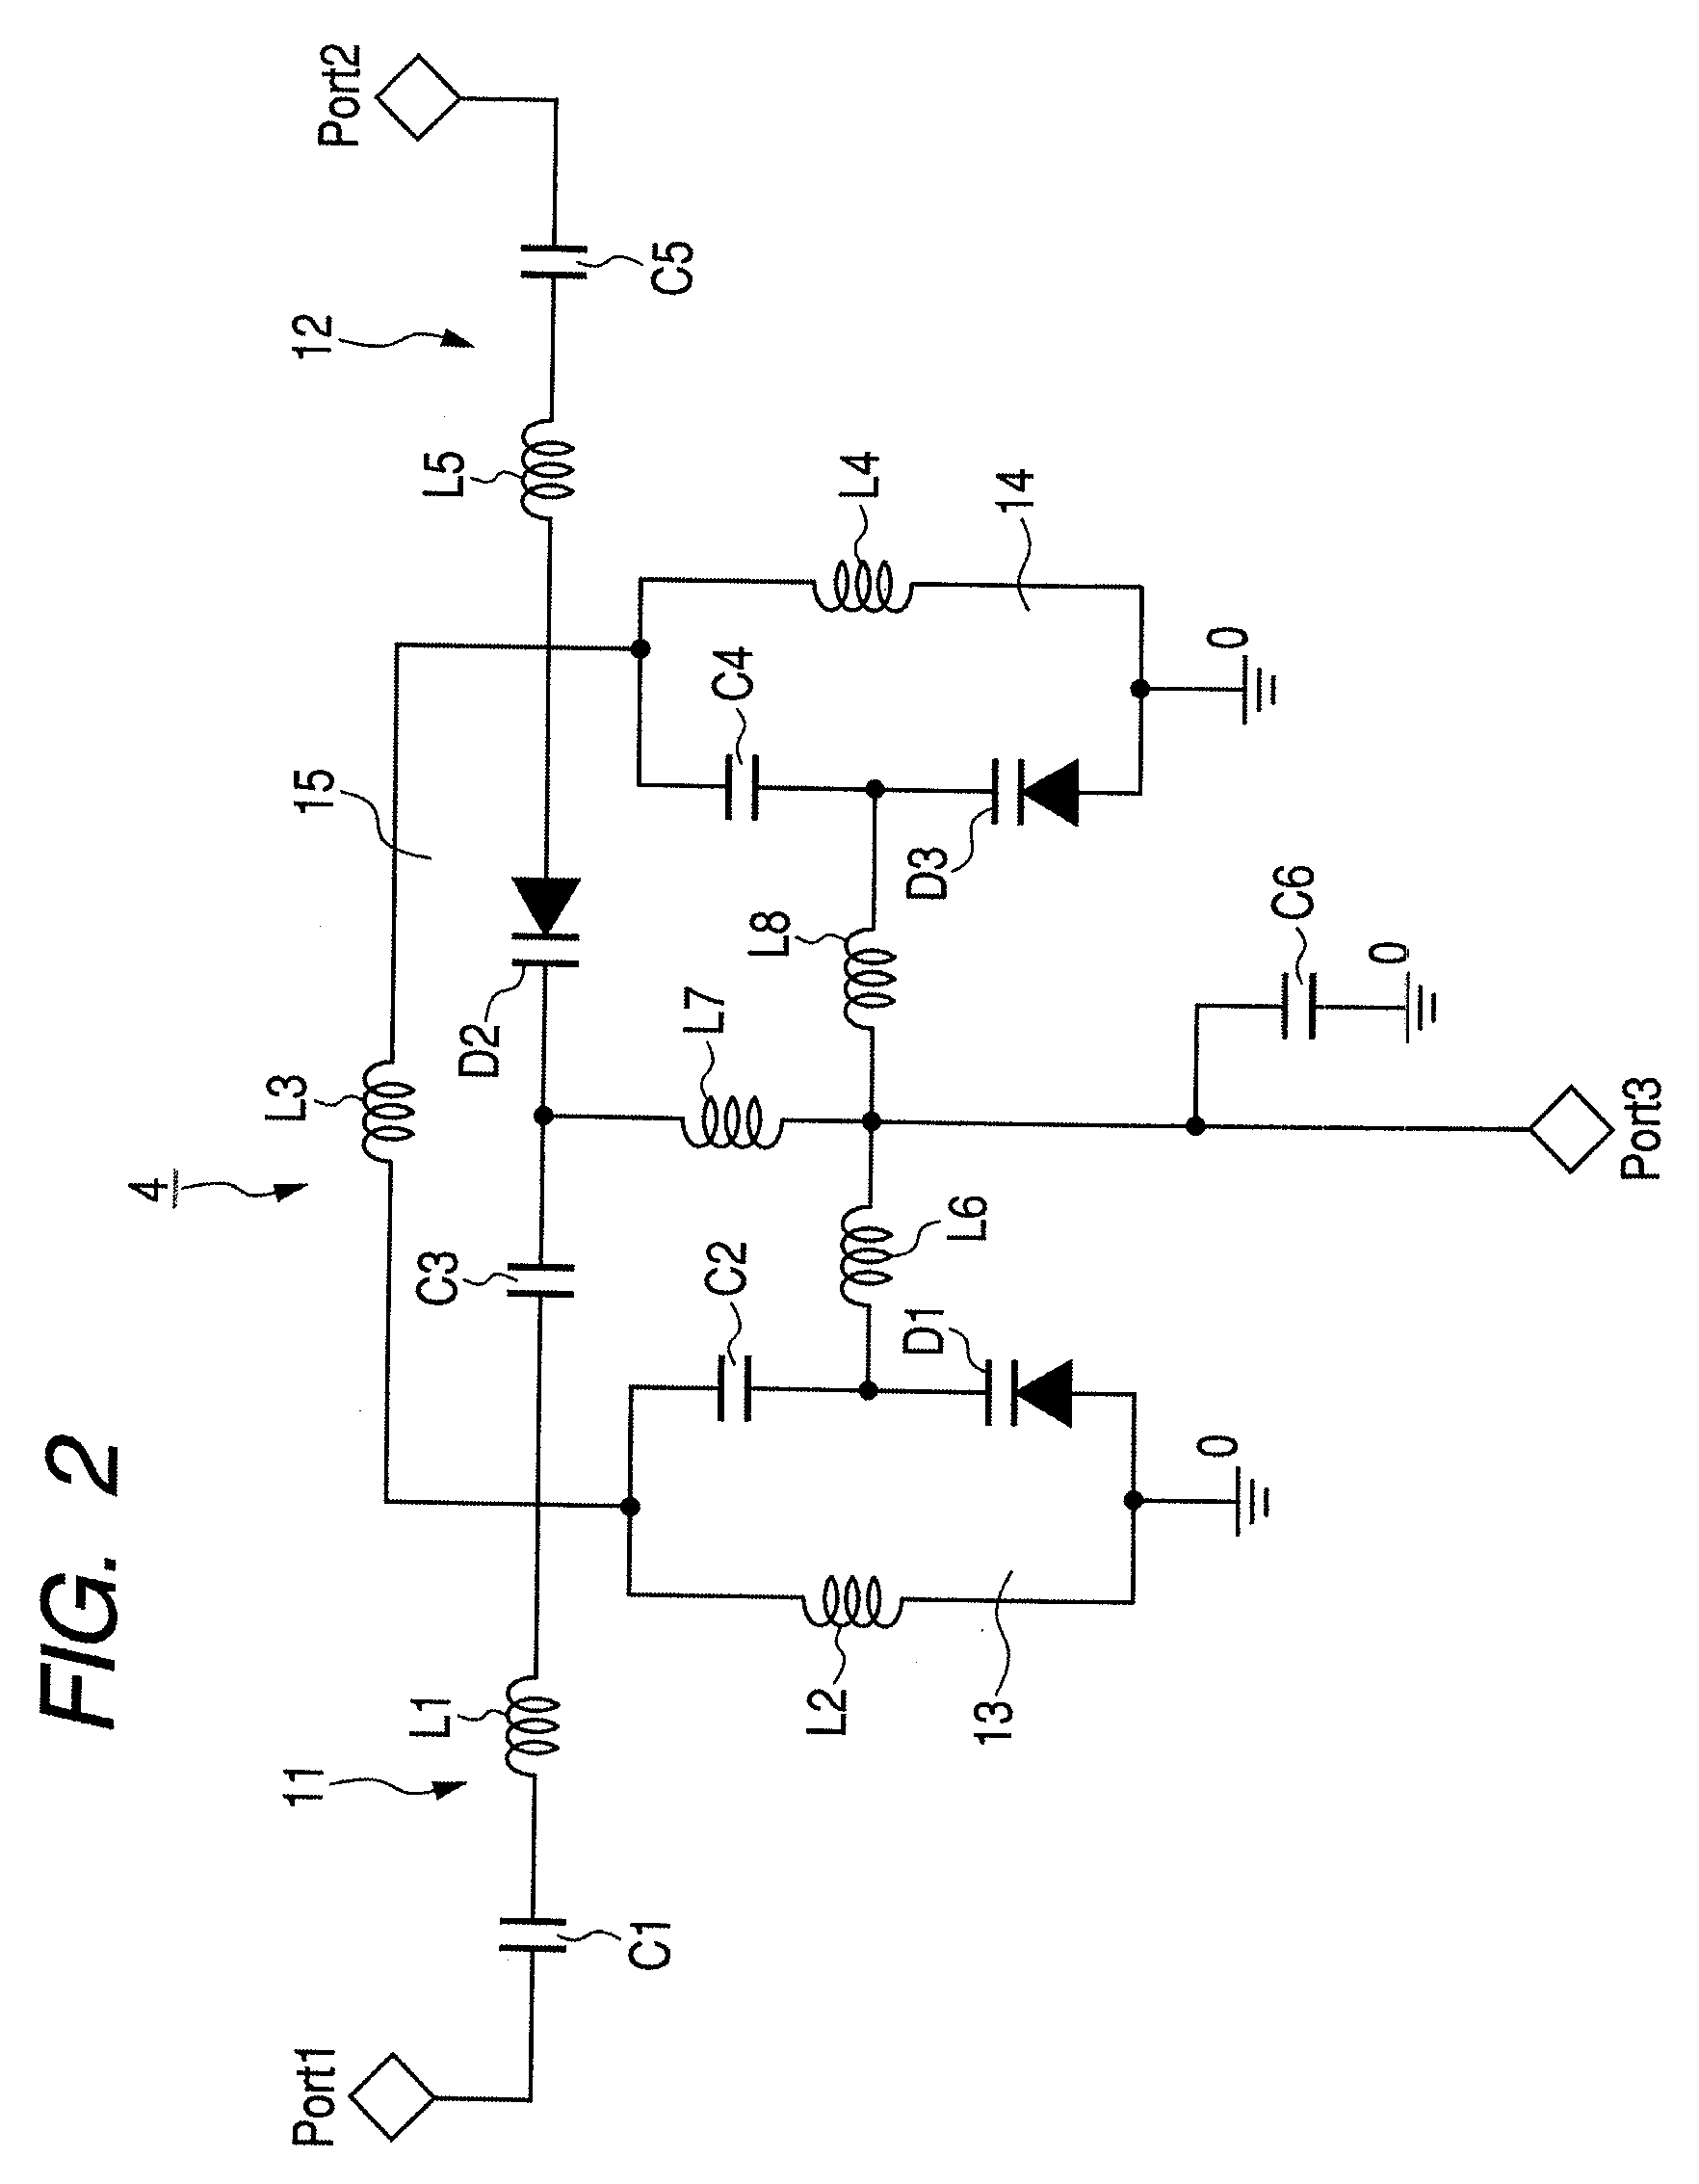 Voltage controlled oscillator including inter-terminal connection and trap circuit